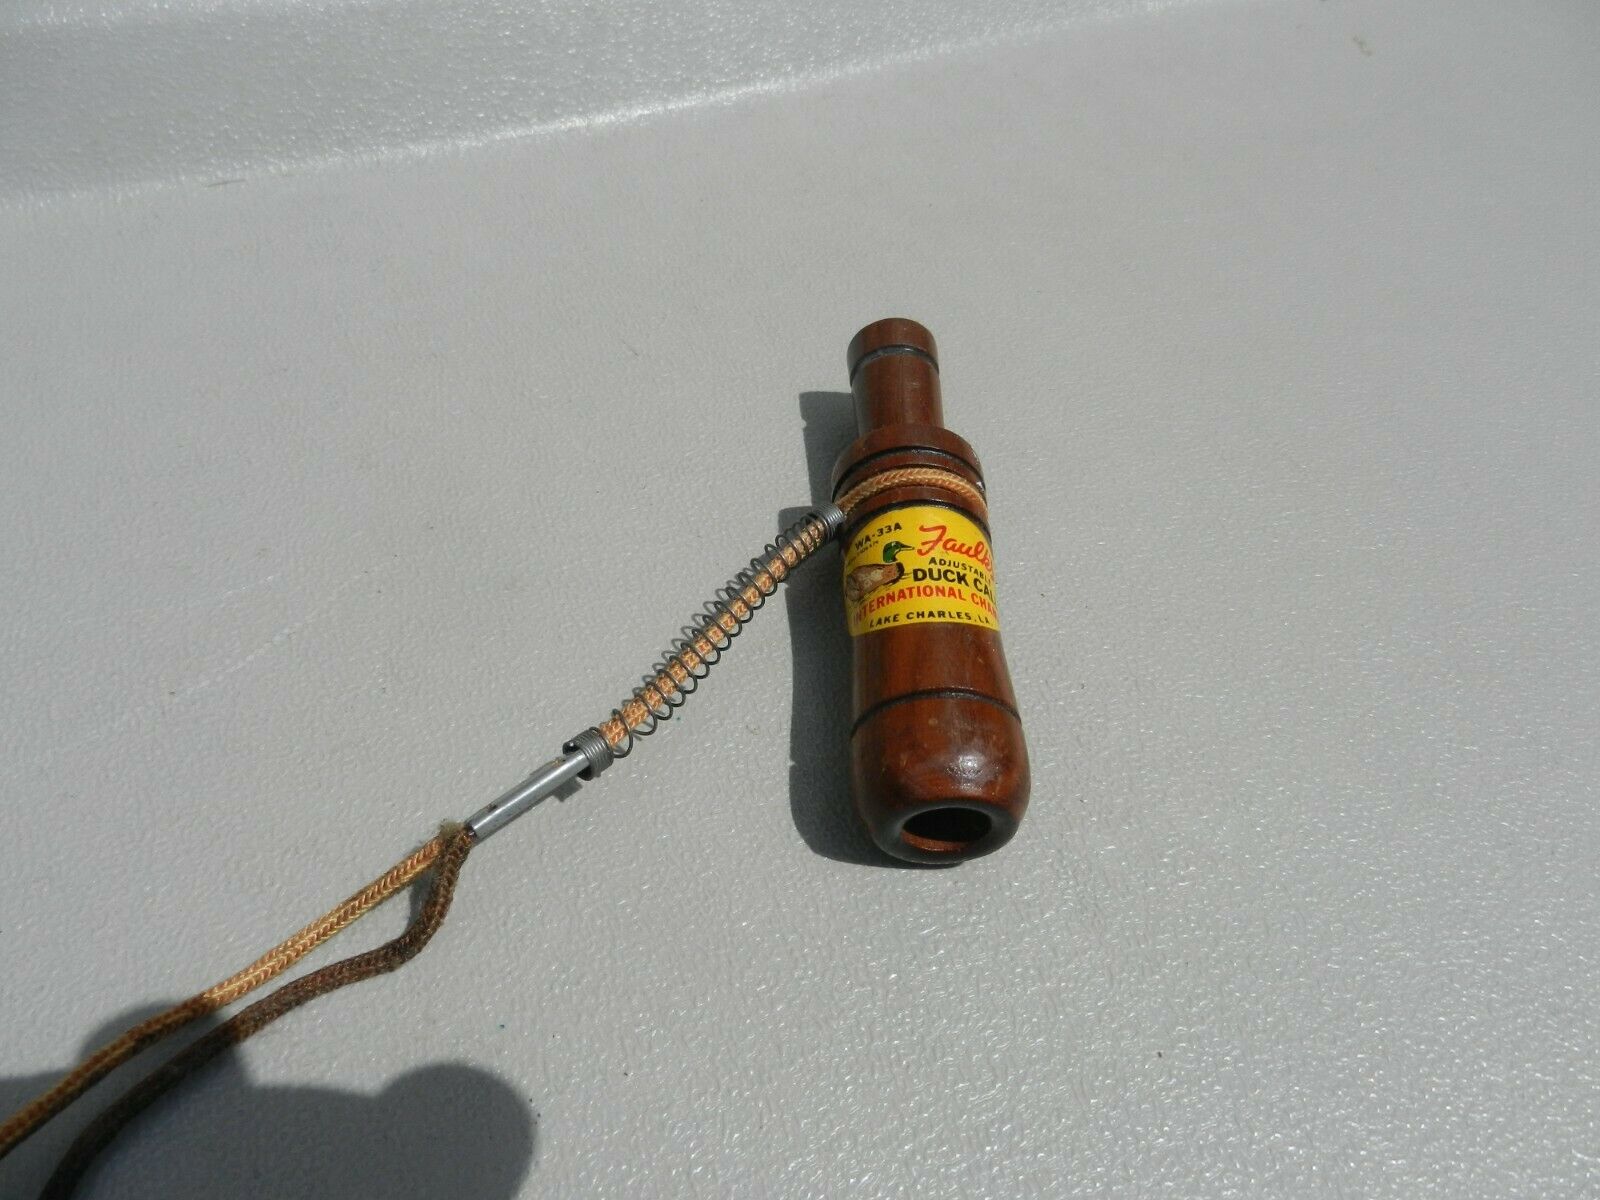 Vintage Faulk's Duck Call Model Wa-33 A With Lanyard 4 3/4" Long Wood Used